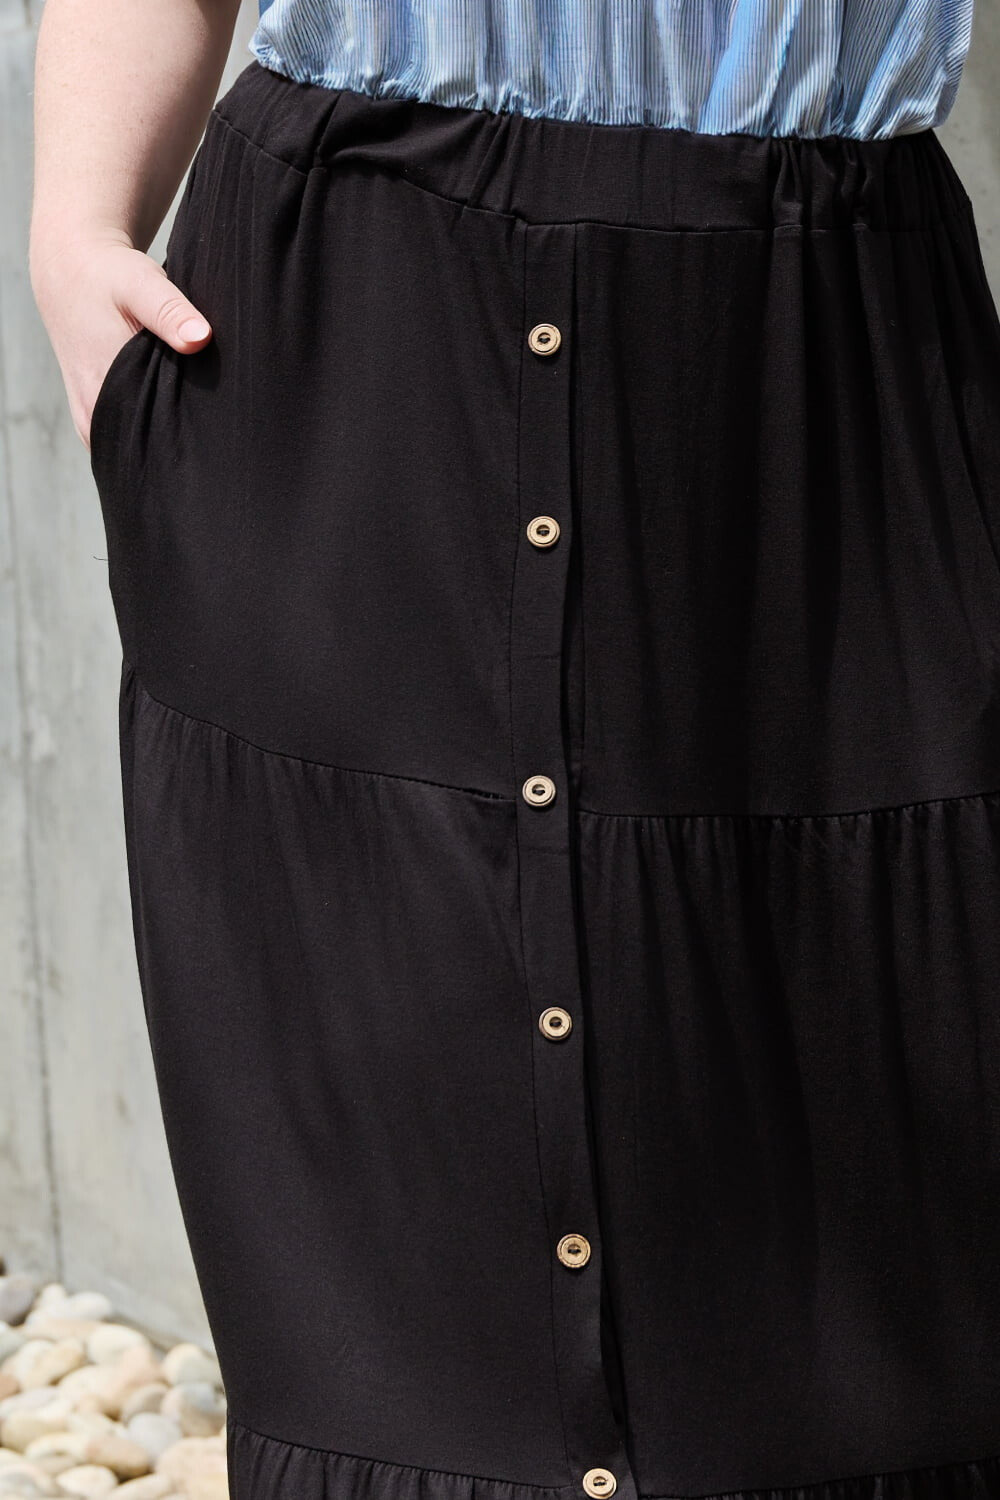 Pocket detail of button front - Missionary modest maxi skirt from Nauvoo Supply Co